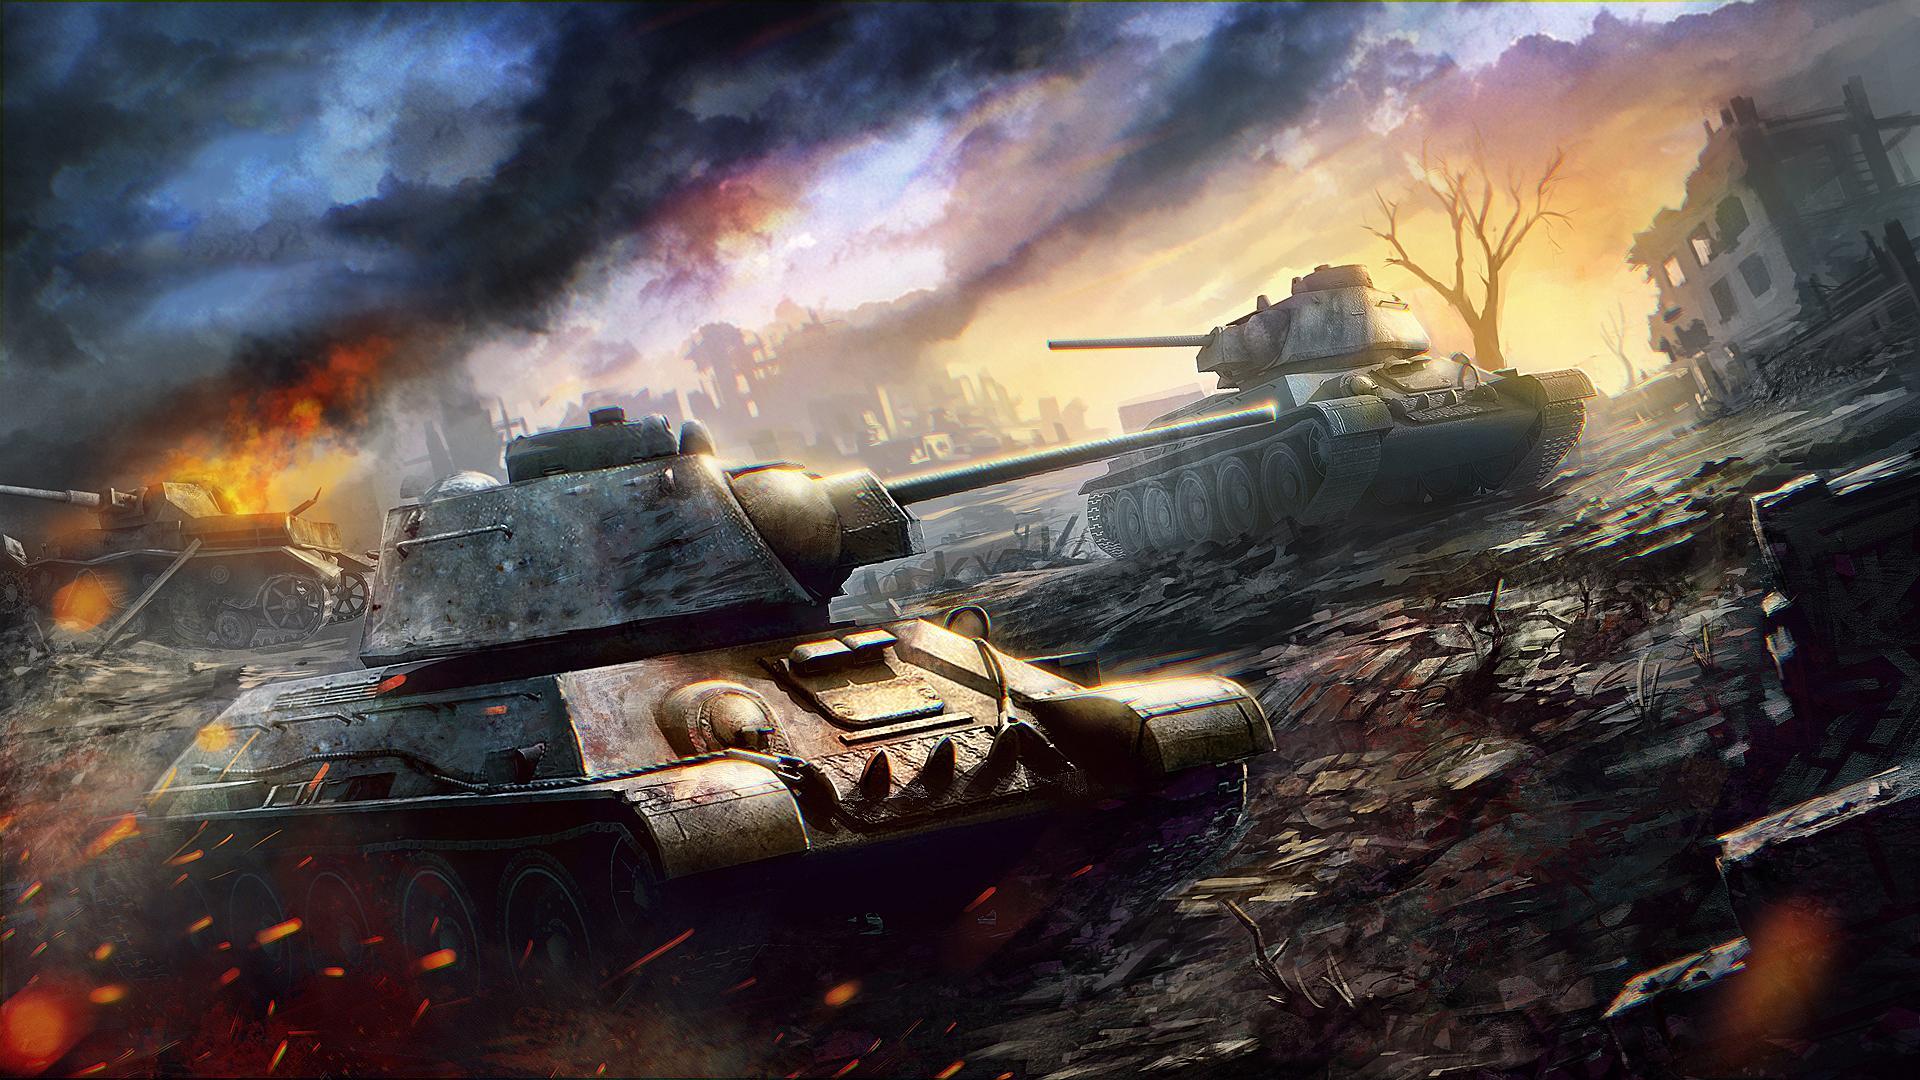 Tanks World Wallpaper 2018 Pictures HD Images Free скриншот 18.